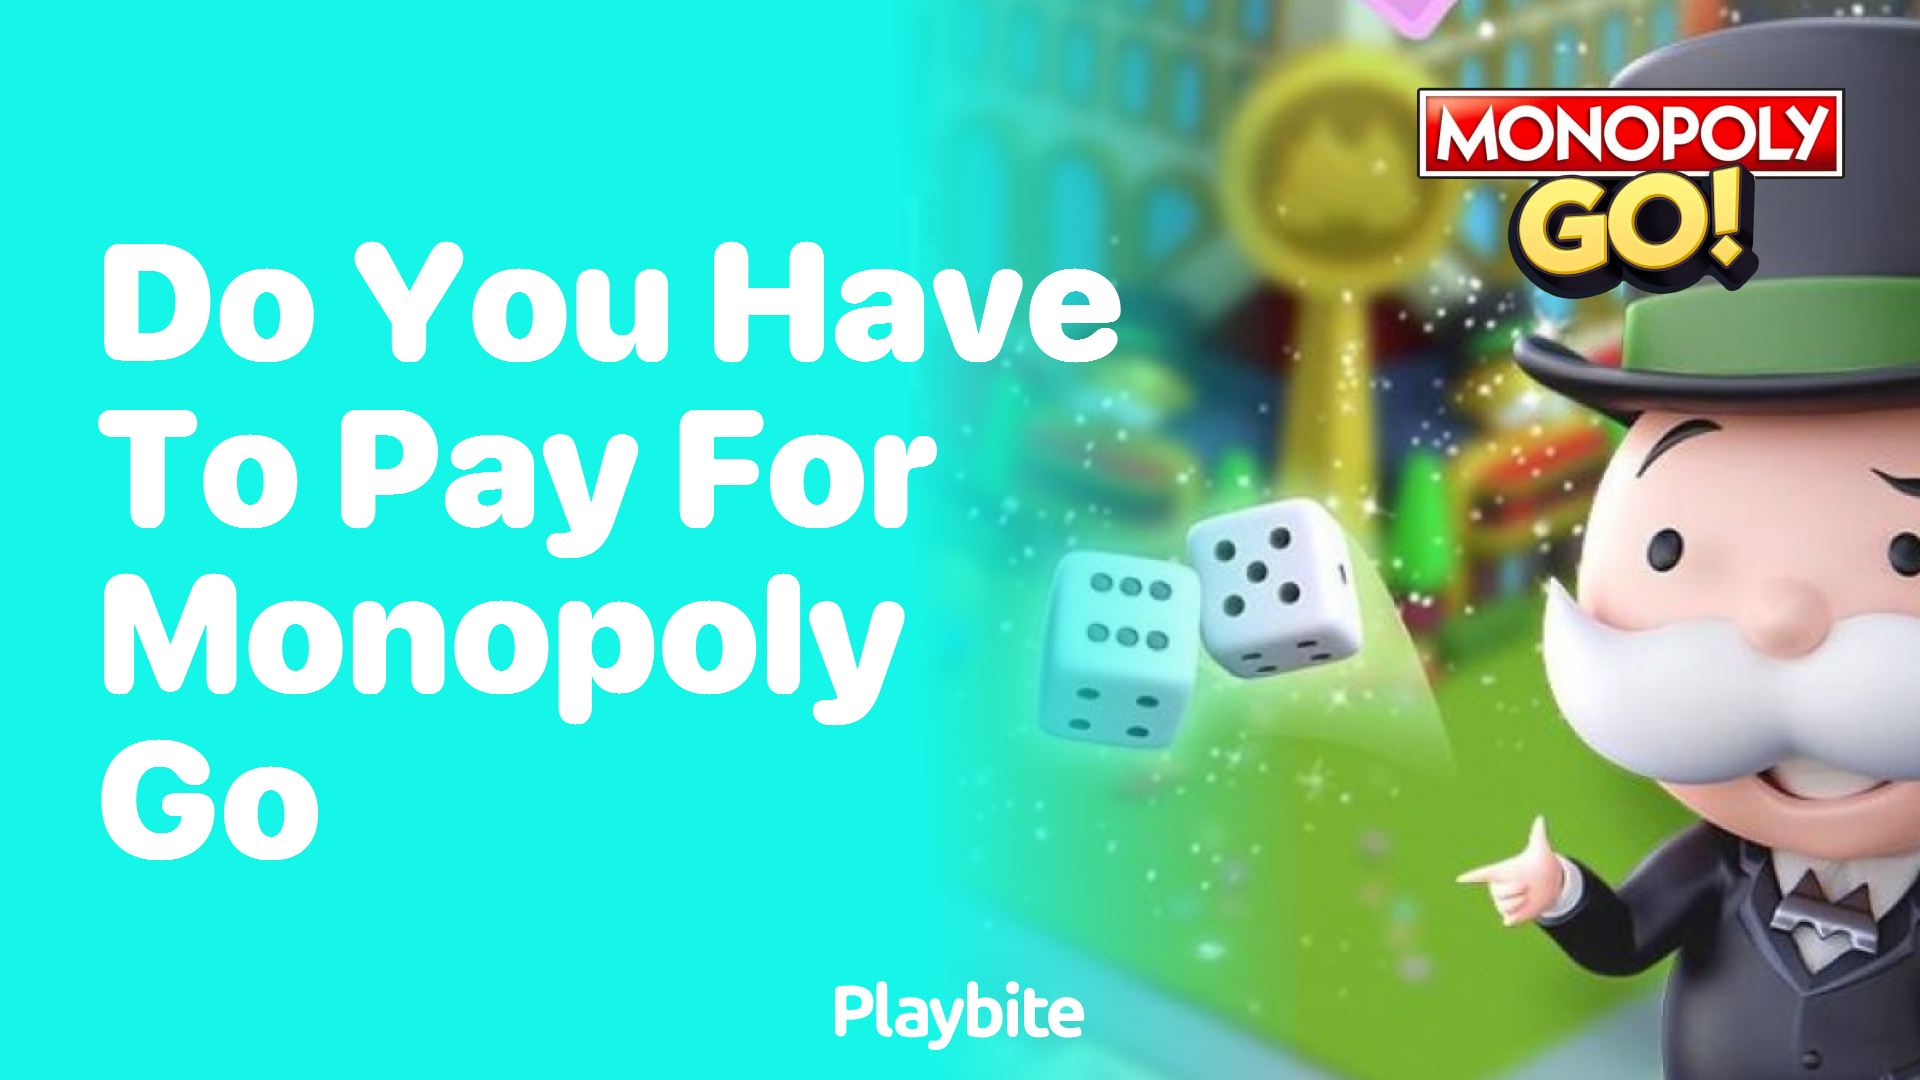 Do You Have to Pay for Monopoly Go?